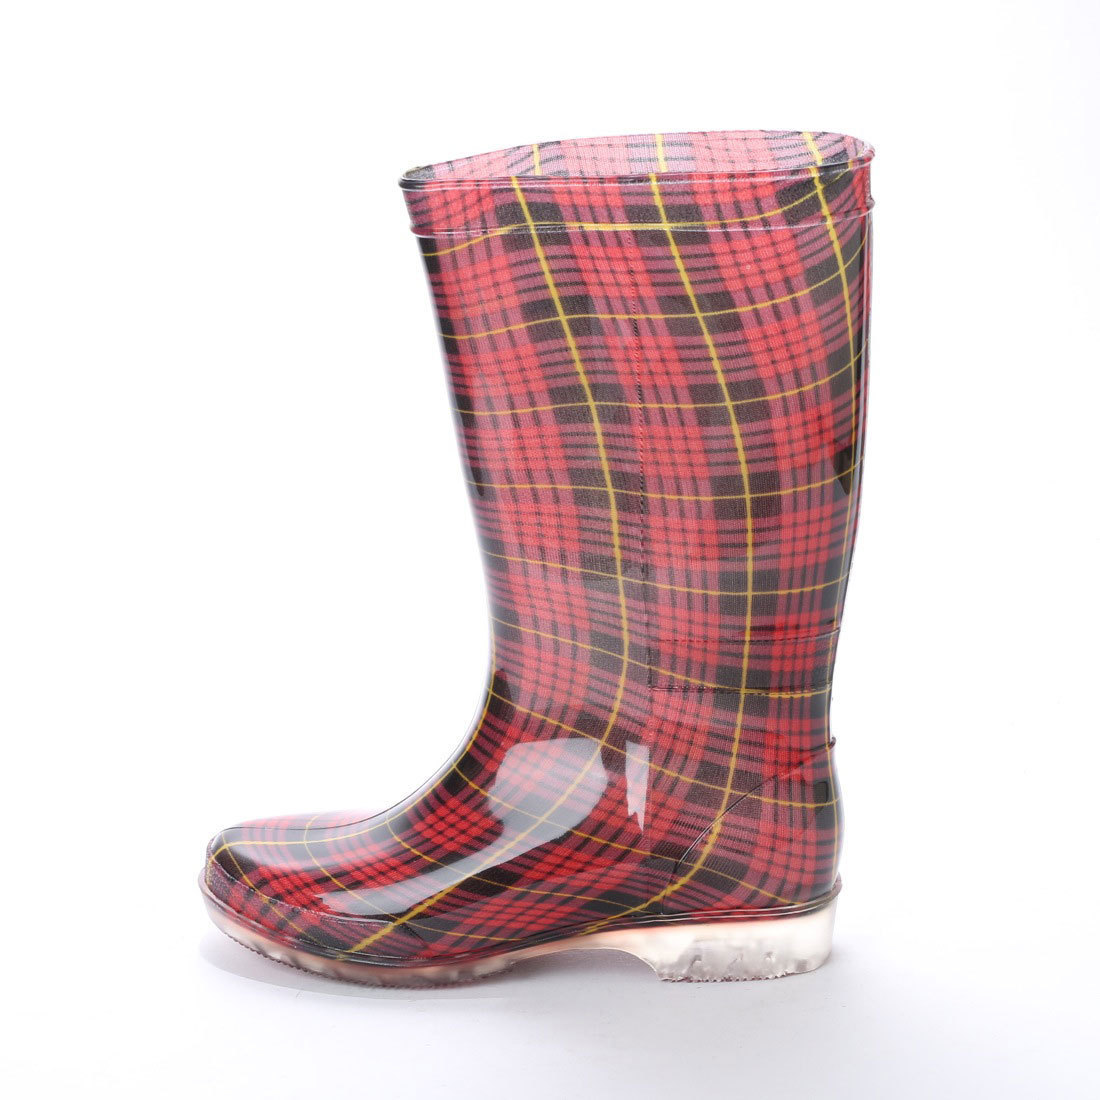 15032 outlet lady's rain boots L/23.5cm-24.0cm RED/CHK( red check ) rain long boots boots long height 15032